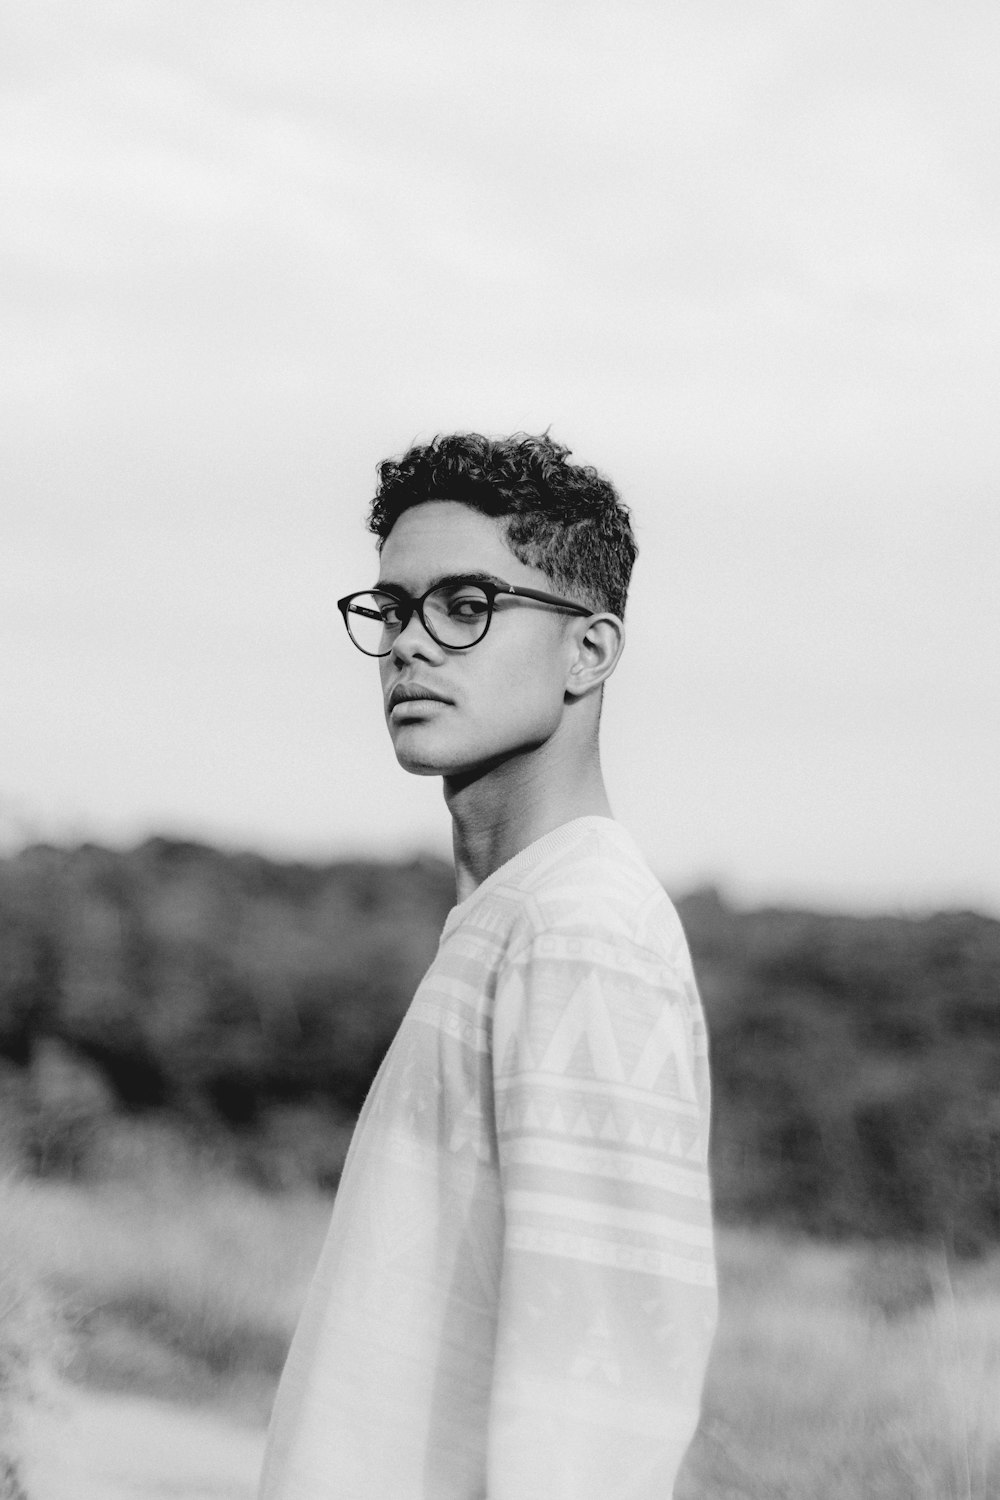 A black and white photo of a man wearing glasses photo – Glasses Image Unsplash